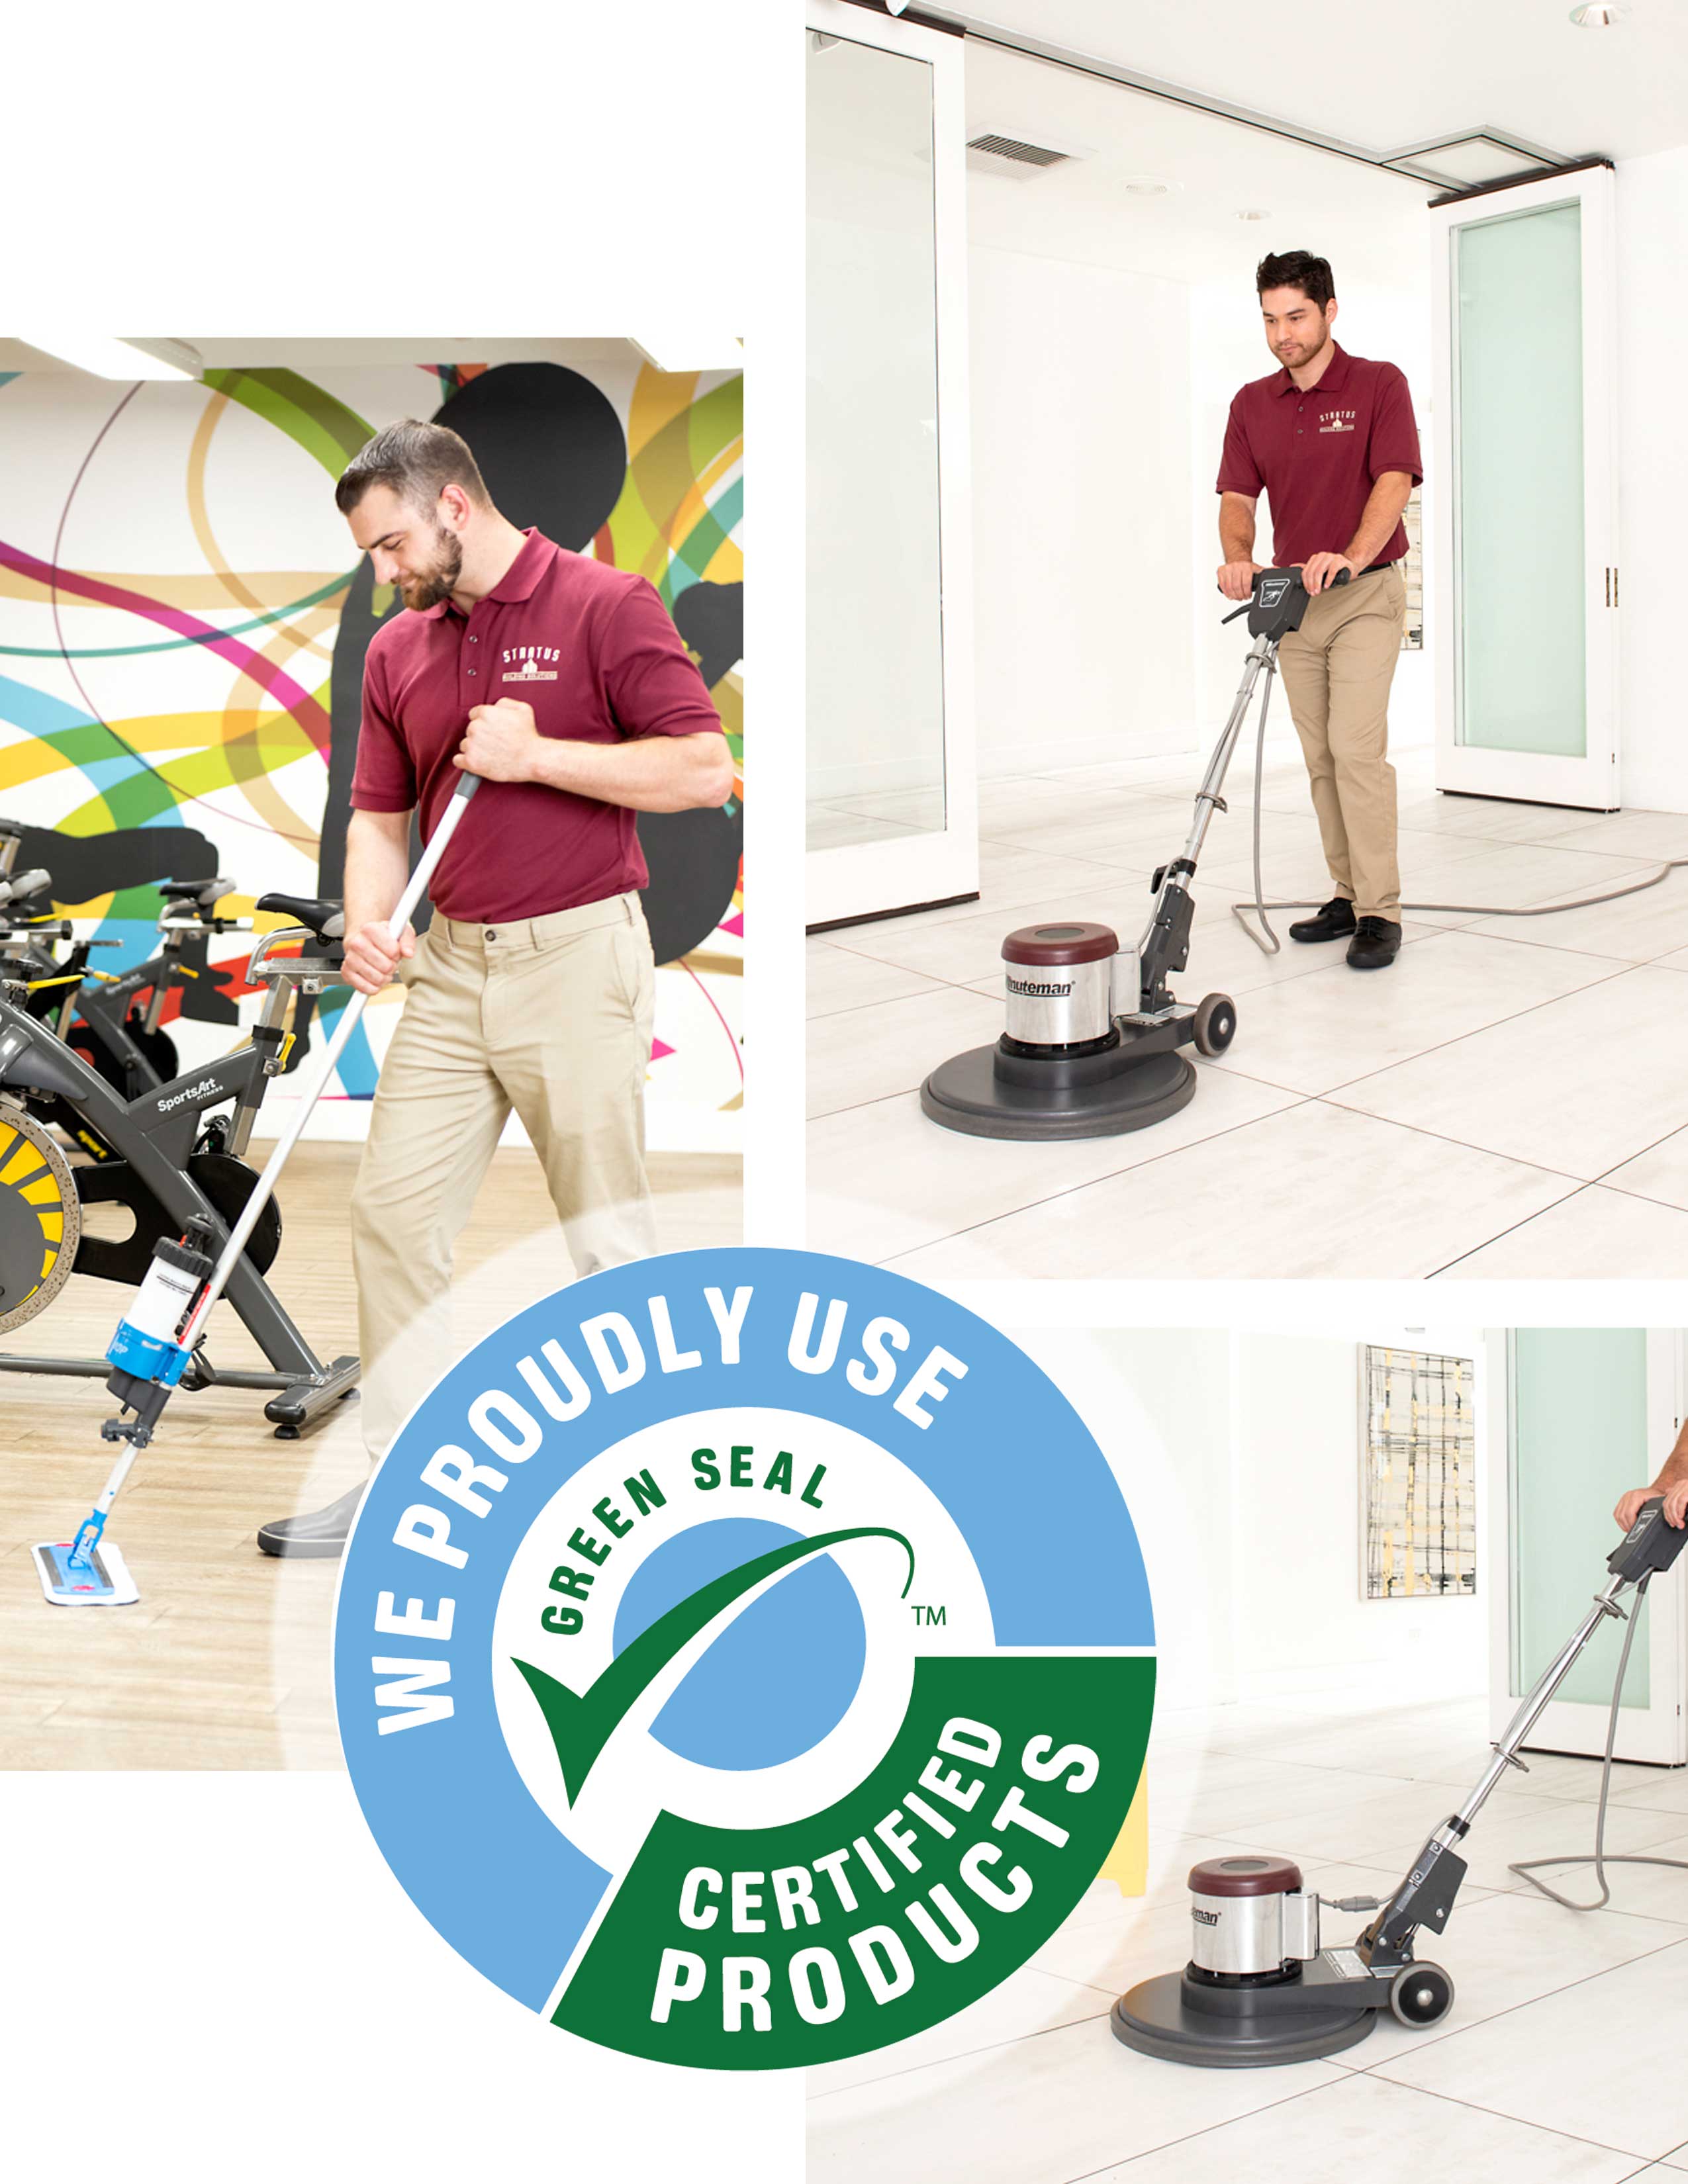 Floor Waxing - Cleaning Company & Maid Service in Las Vegas, NV